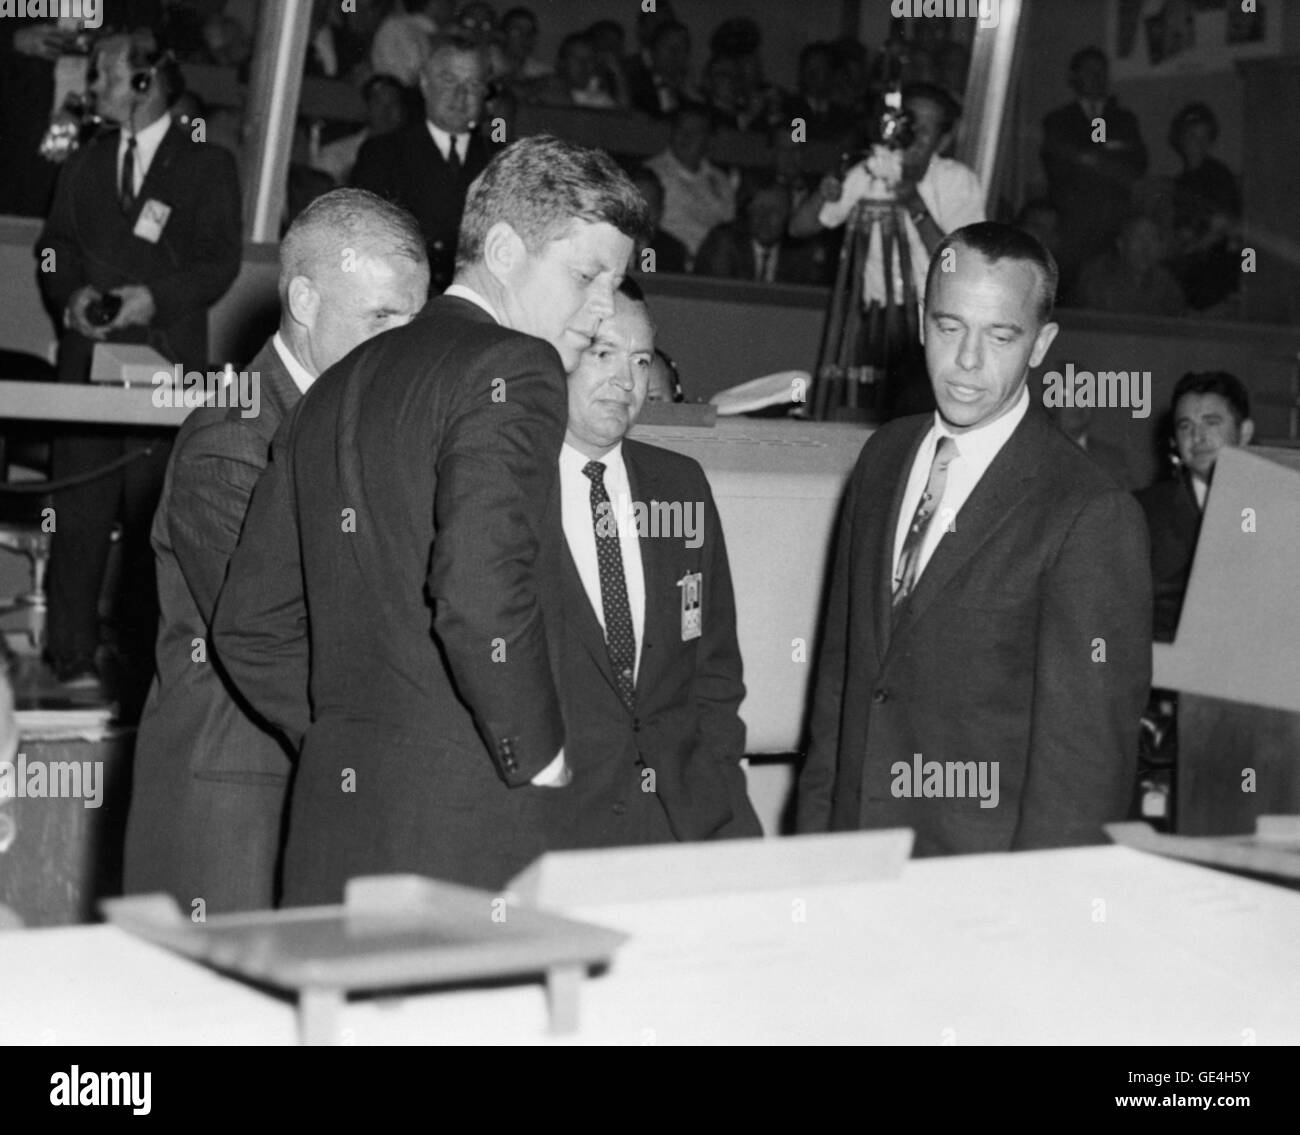 President John F. Kennedy is briefed on the operation of Mercury Control Center at Cape Canaveral following the Mercury-Atlas 6 (MA-6) flight. This was President Kennedy's first visit to Cape Canaveral. MA-6 astronaut John H. Glenn, Jr. (partially obscured) piloted the Mercury &quot;Friendship 7&quot; spacecraft on the United States' first human orbital flight. In the center (on Glenn's left) is Christopher C. Kraft, Jr., MA-6 flight director and Chief of Flight Operations at the Manned Spacecraft Center (MSC). The MA-6 flight was on February 20, 1962. Astronaut Alan B. Shepard, Jr. (right), p Stock Photo